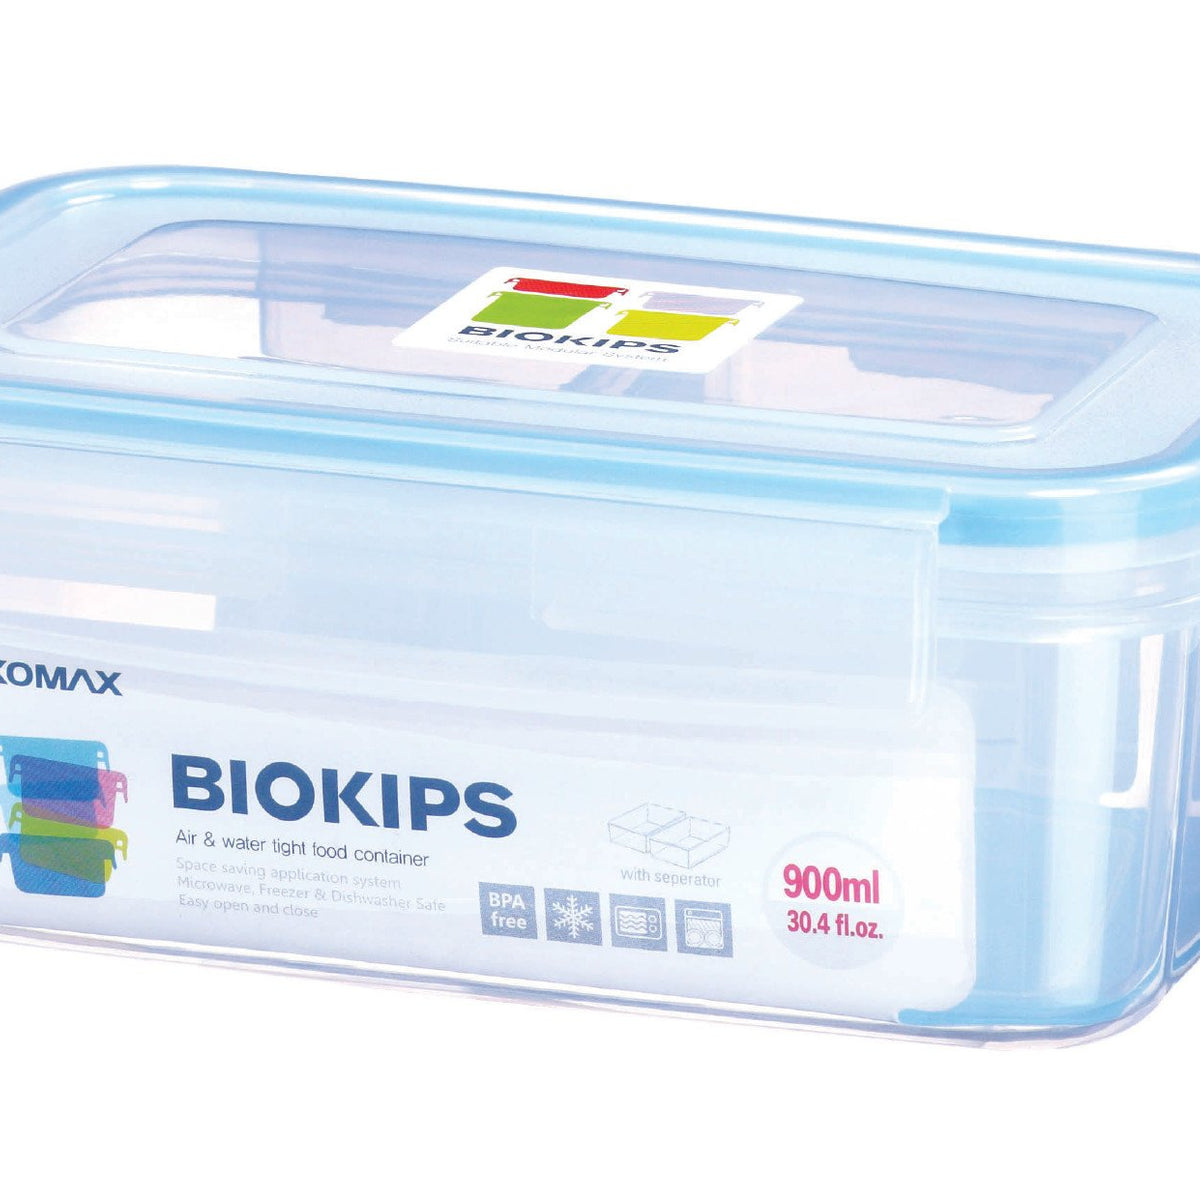 Komax Biokips Rectangular Air & Water Tight Food Container 450ml (15.2  fl.oz) includes two removeable dividers - GetStorganized